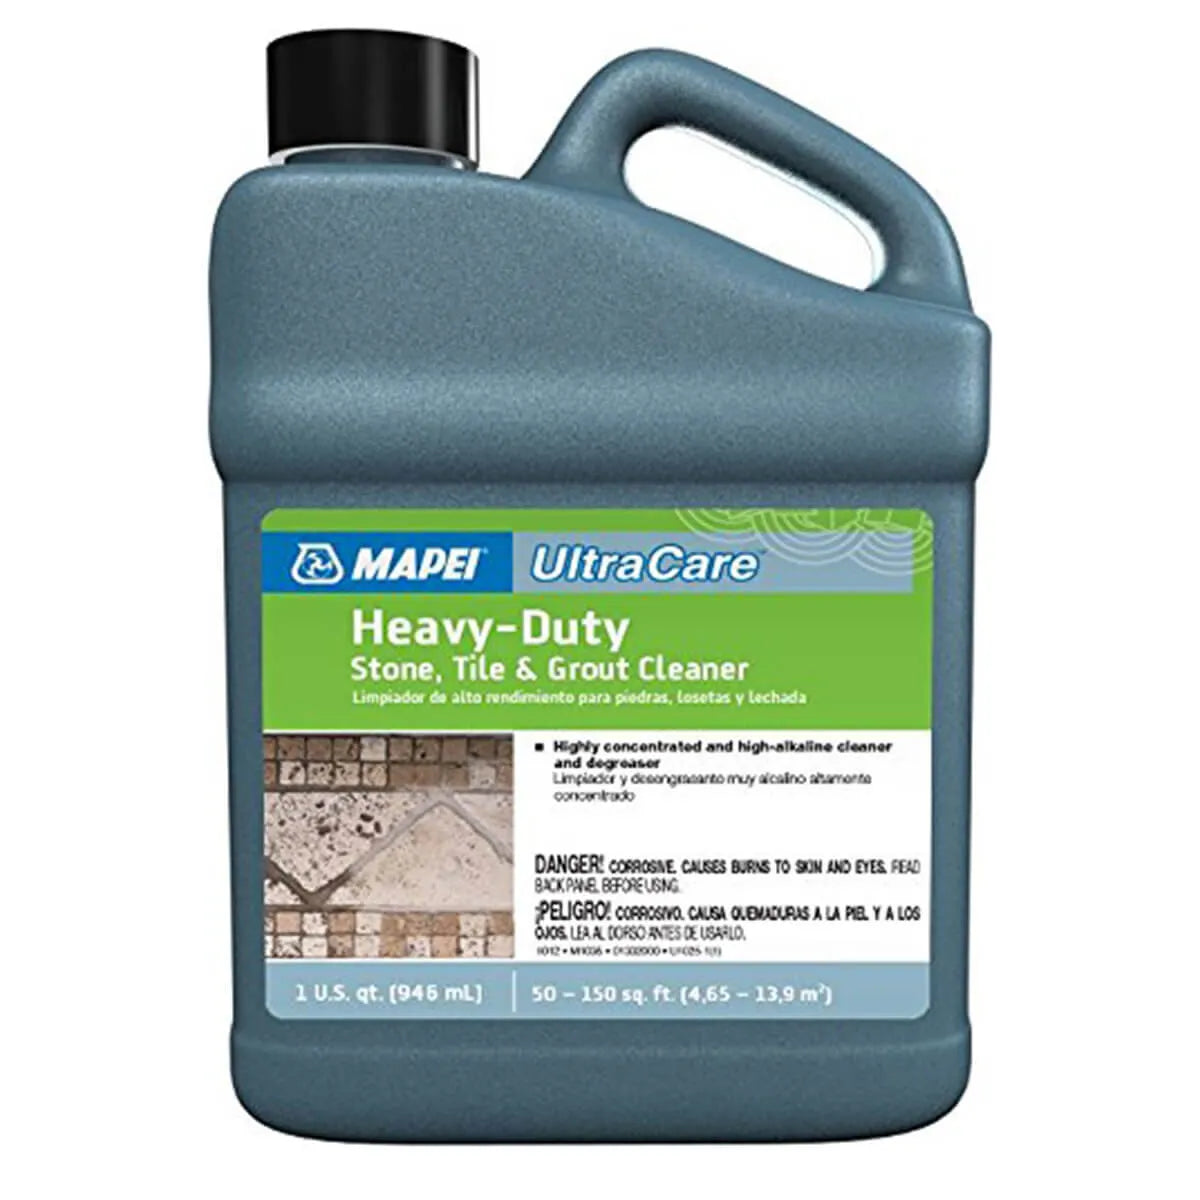 Mapei Ultracare Heavy-Duty Tile, Stone and Grout Cleaner